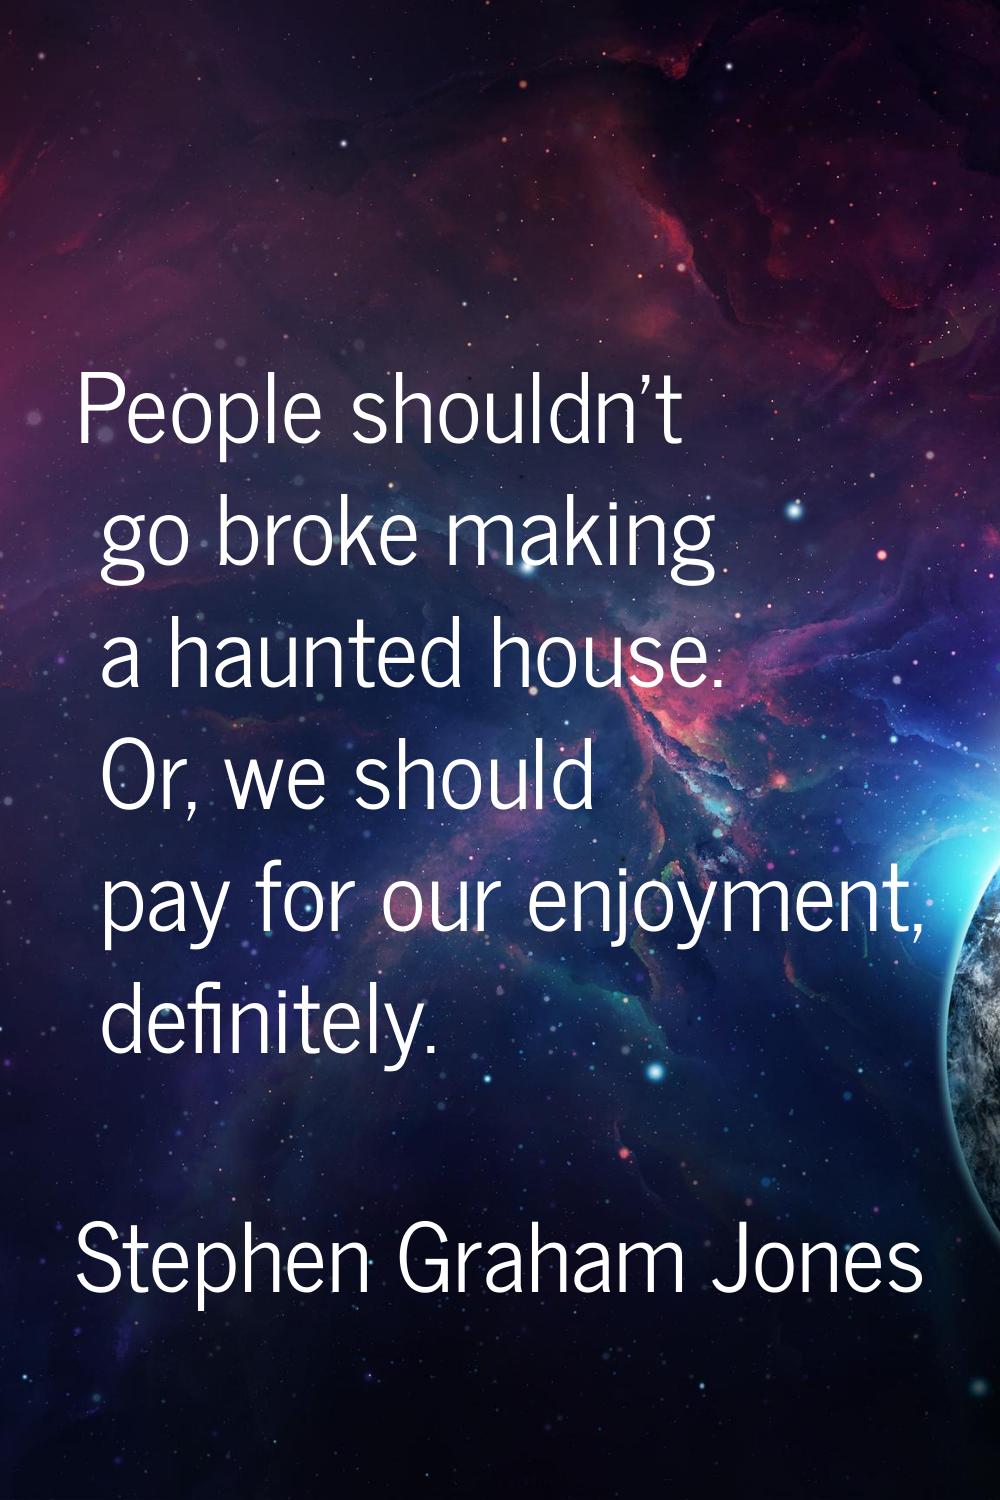 People shouldn't go broke making a haunted house. Or, we should pay for our enjoyment, definitely.